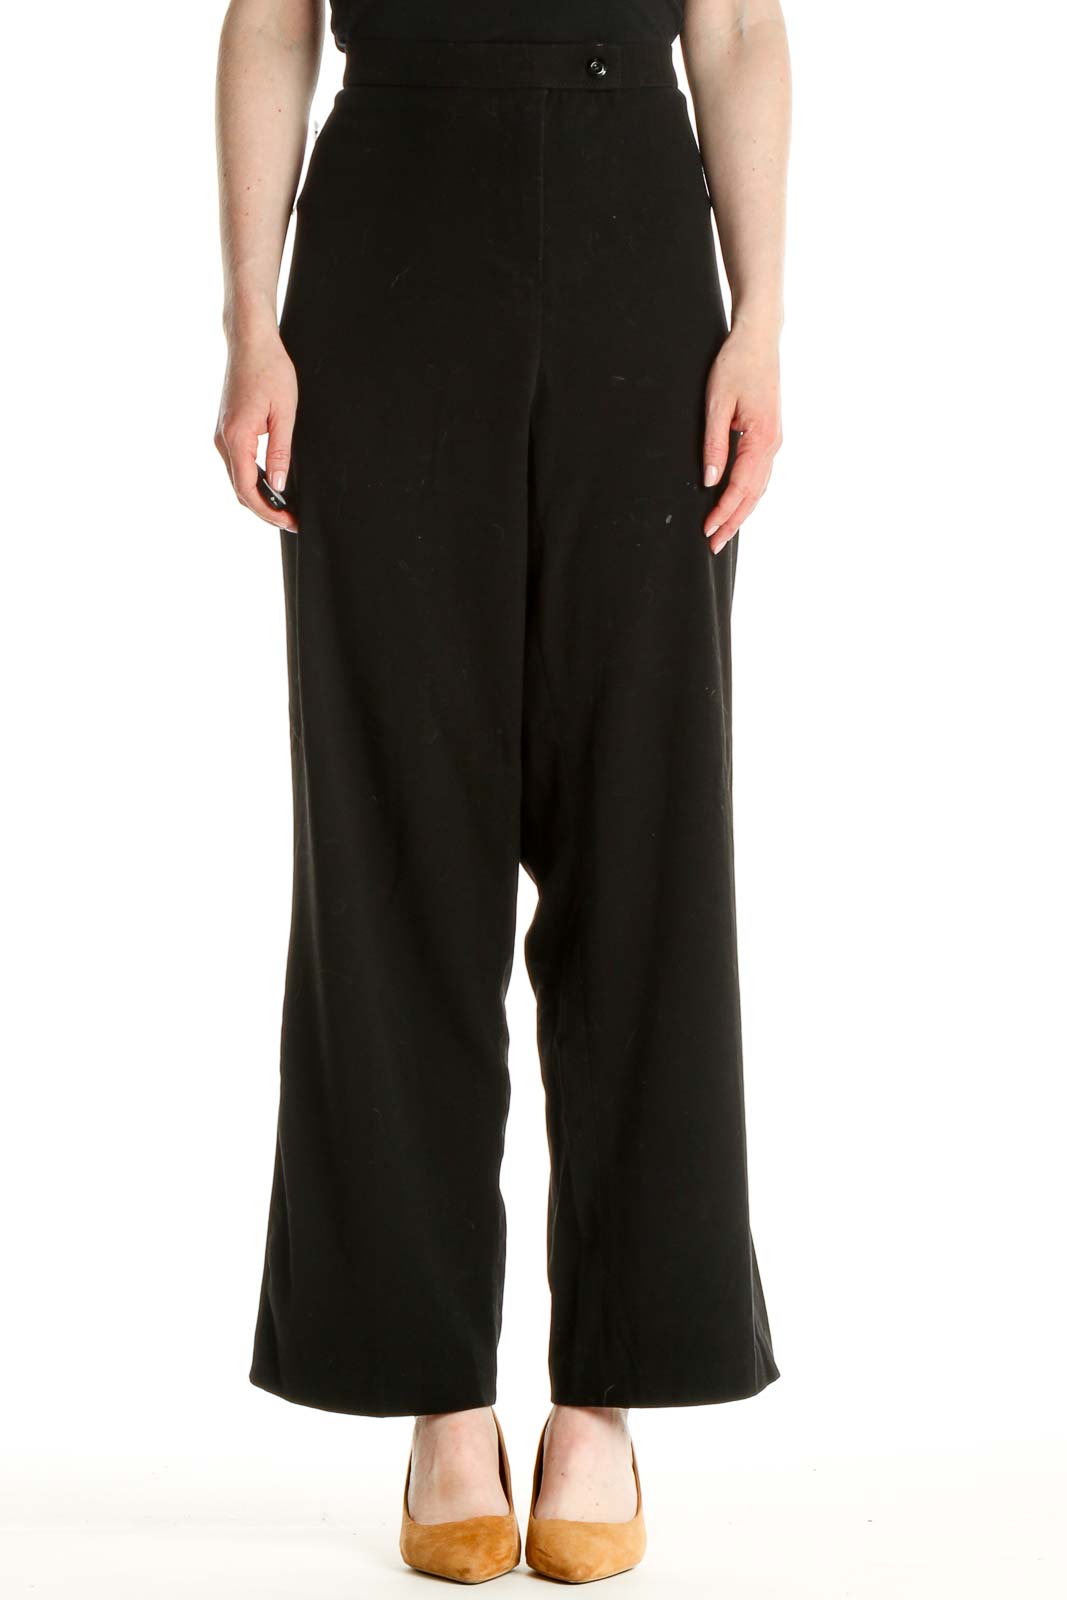 Black Solid All Day Wear Wide Leg Trousers Front